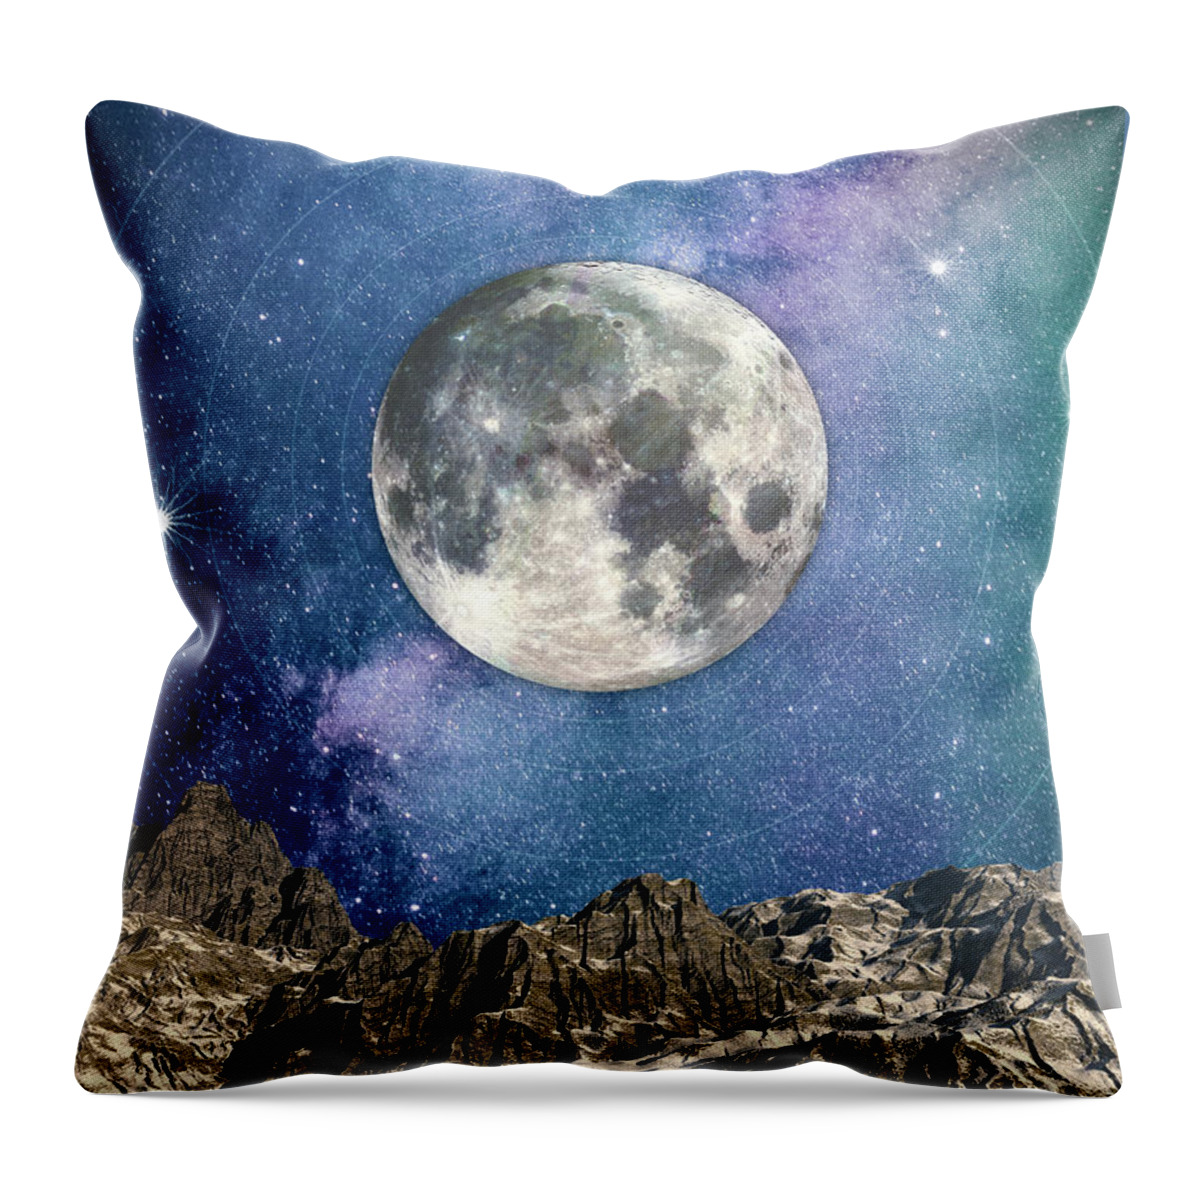 Moon Throw Pillow featuring the digital art Moon Over Mountains #1 by Phil Perkins